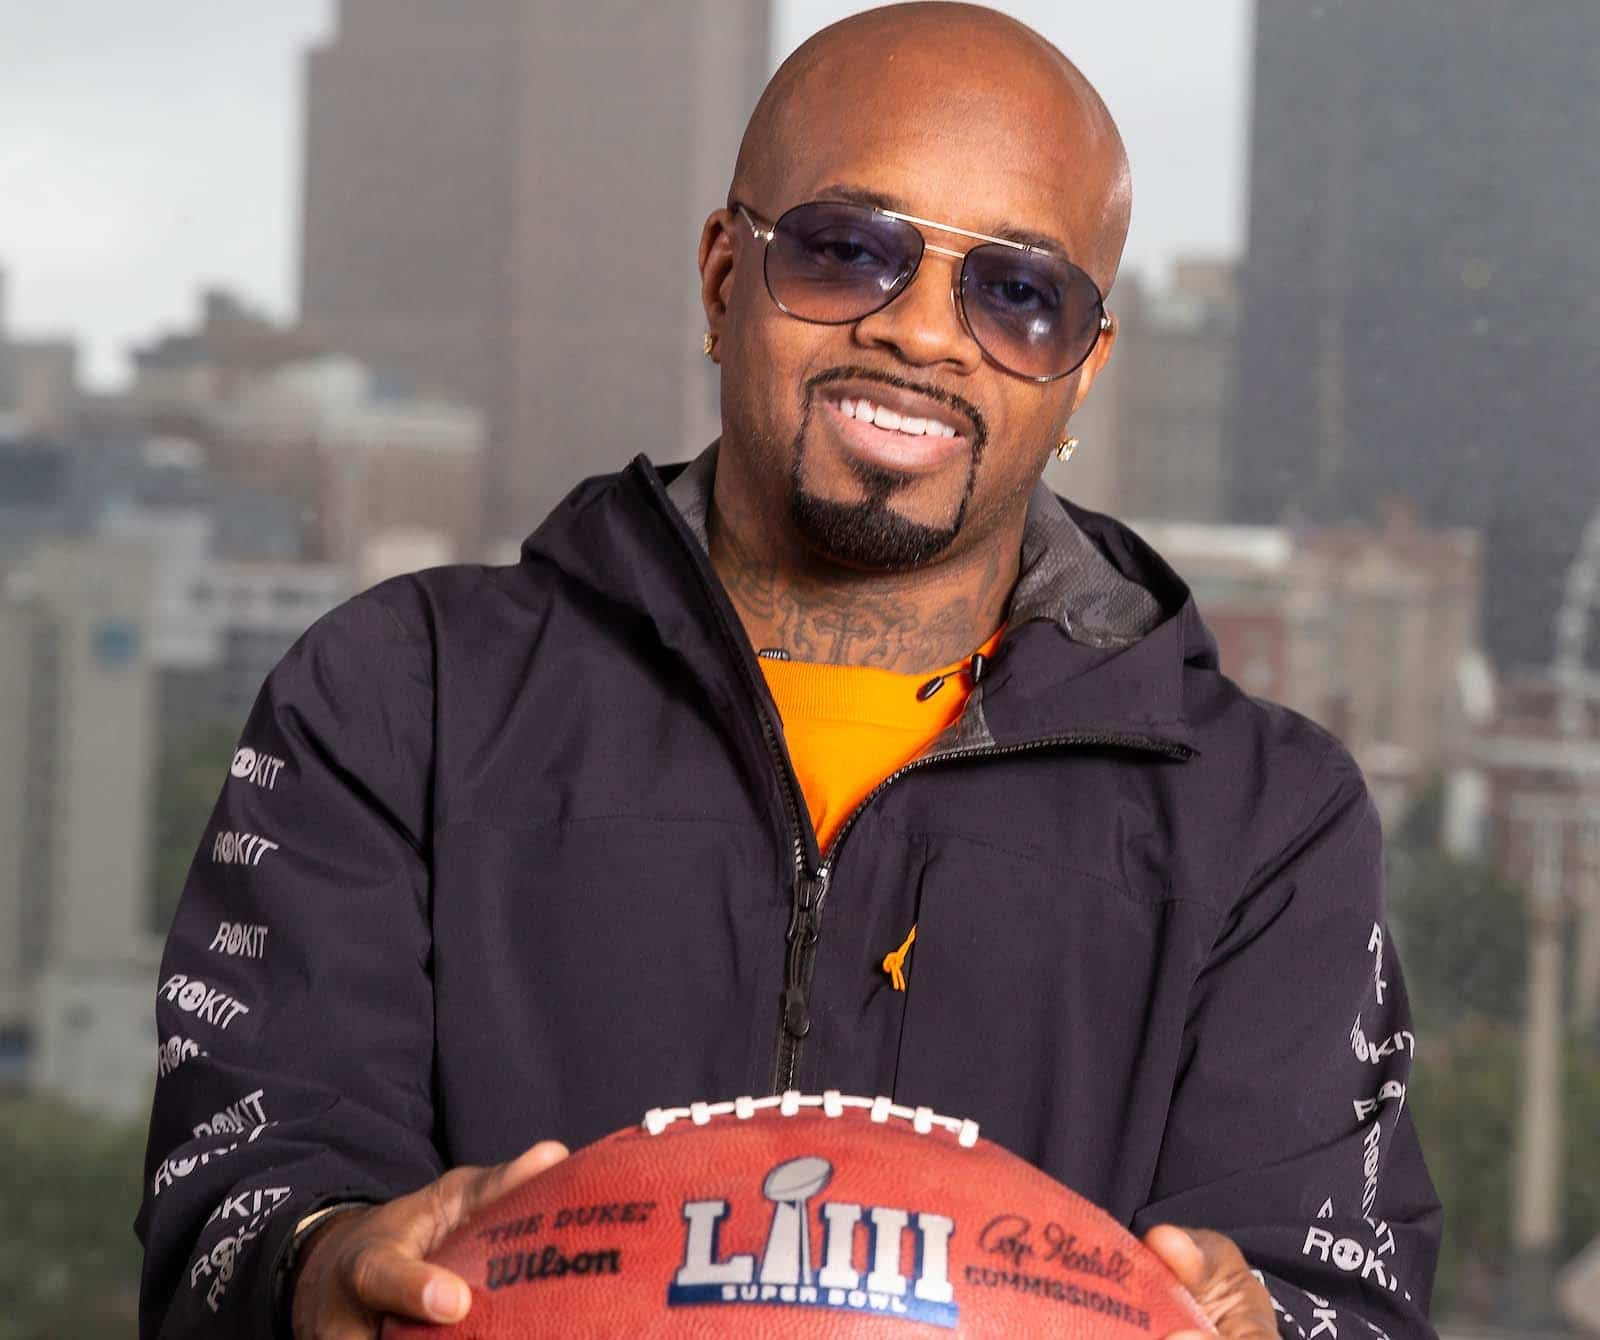 Jermaine Dupri Picked To Produce ‘Welcome To Atlanta’ Series Of Concerts Before Super Bowl LIII